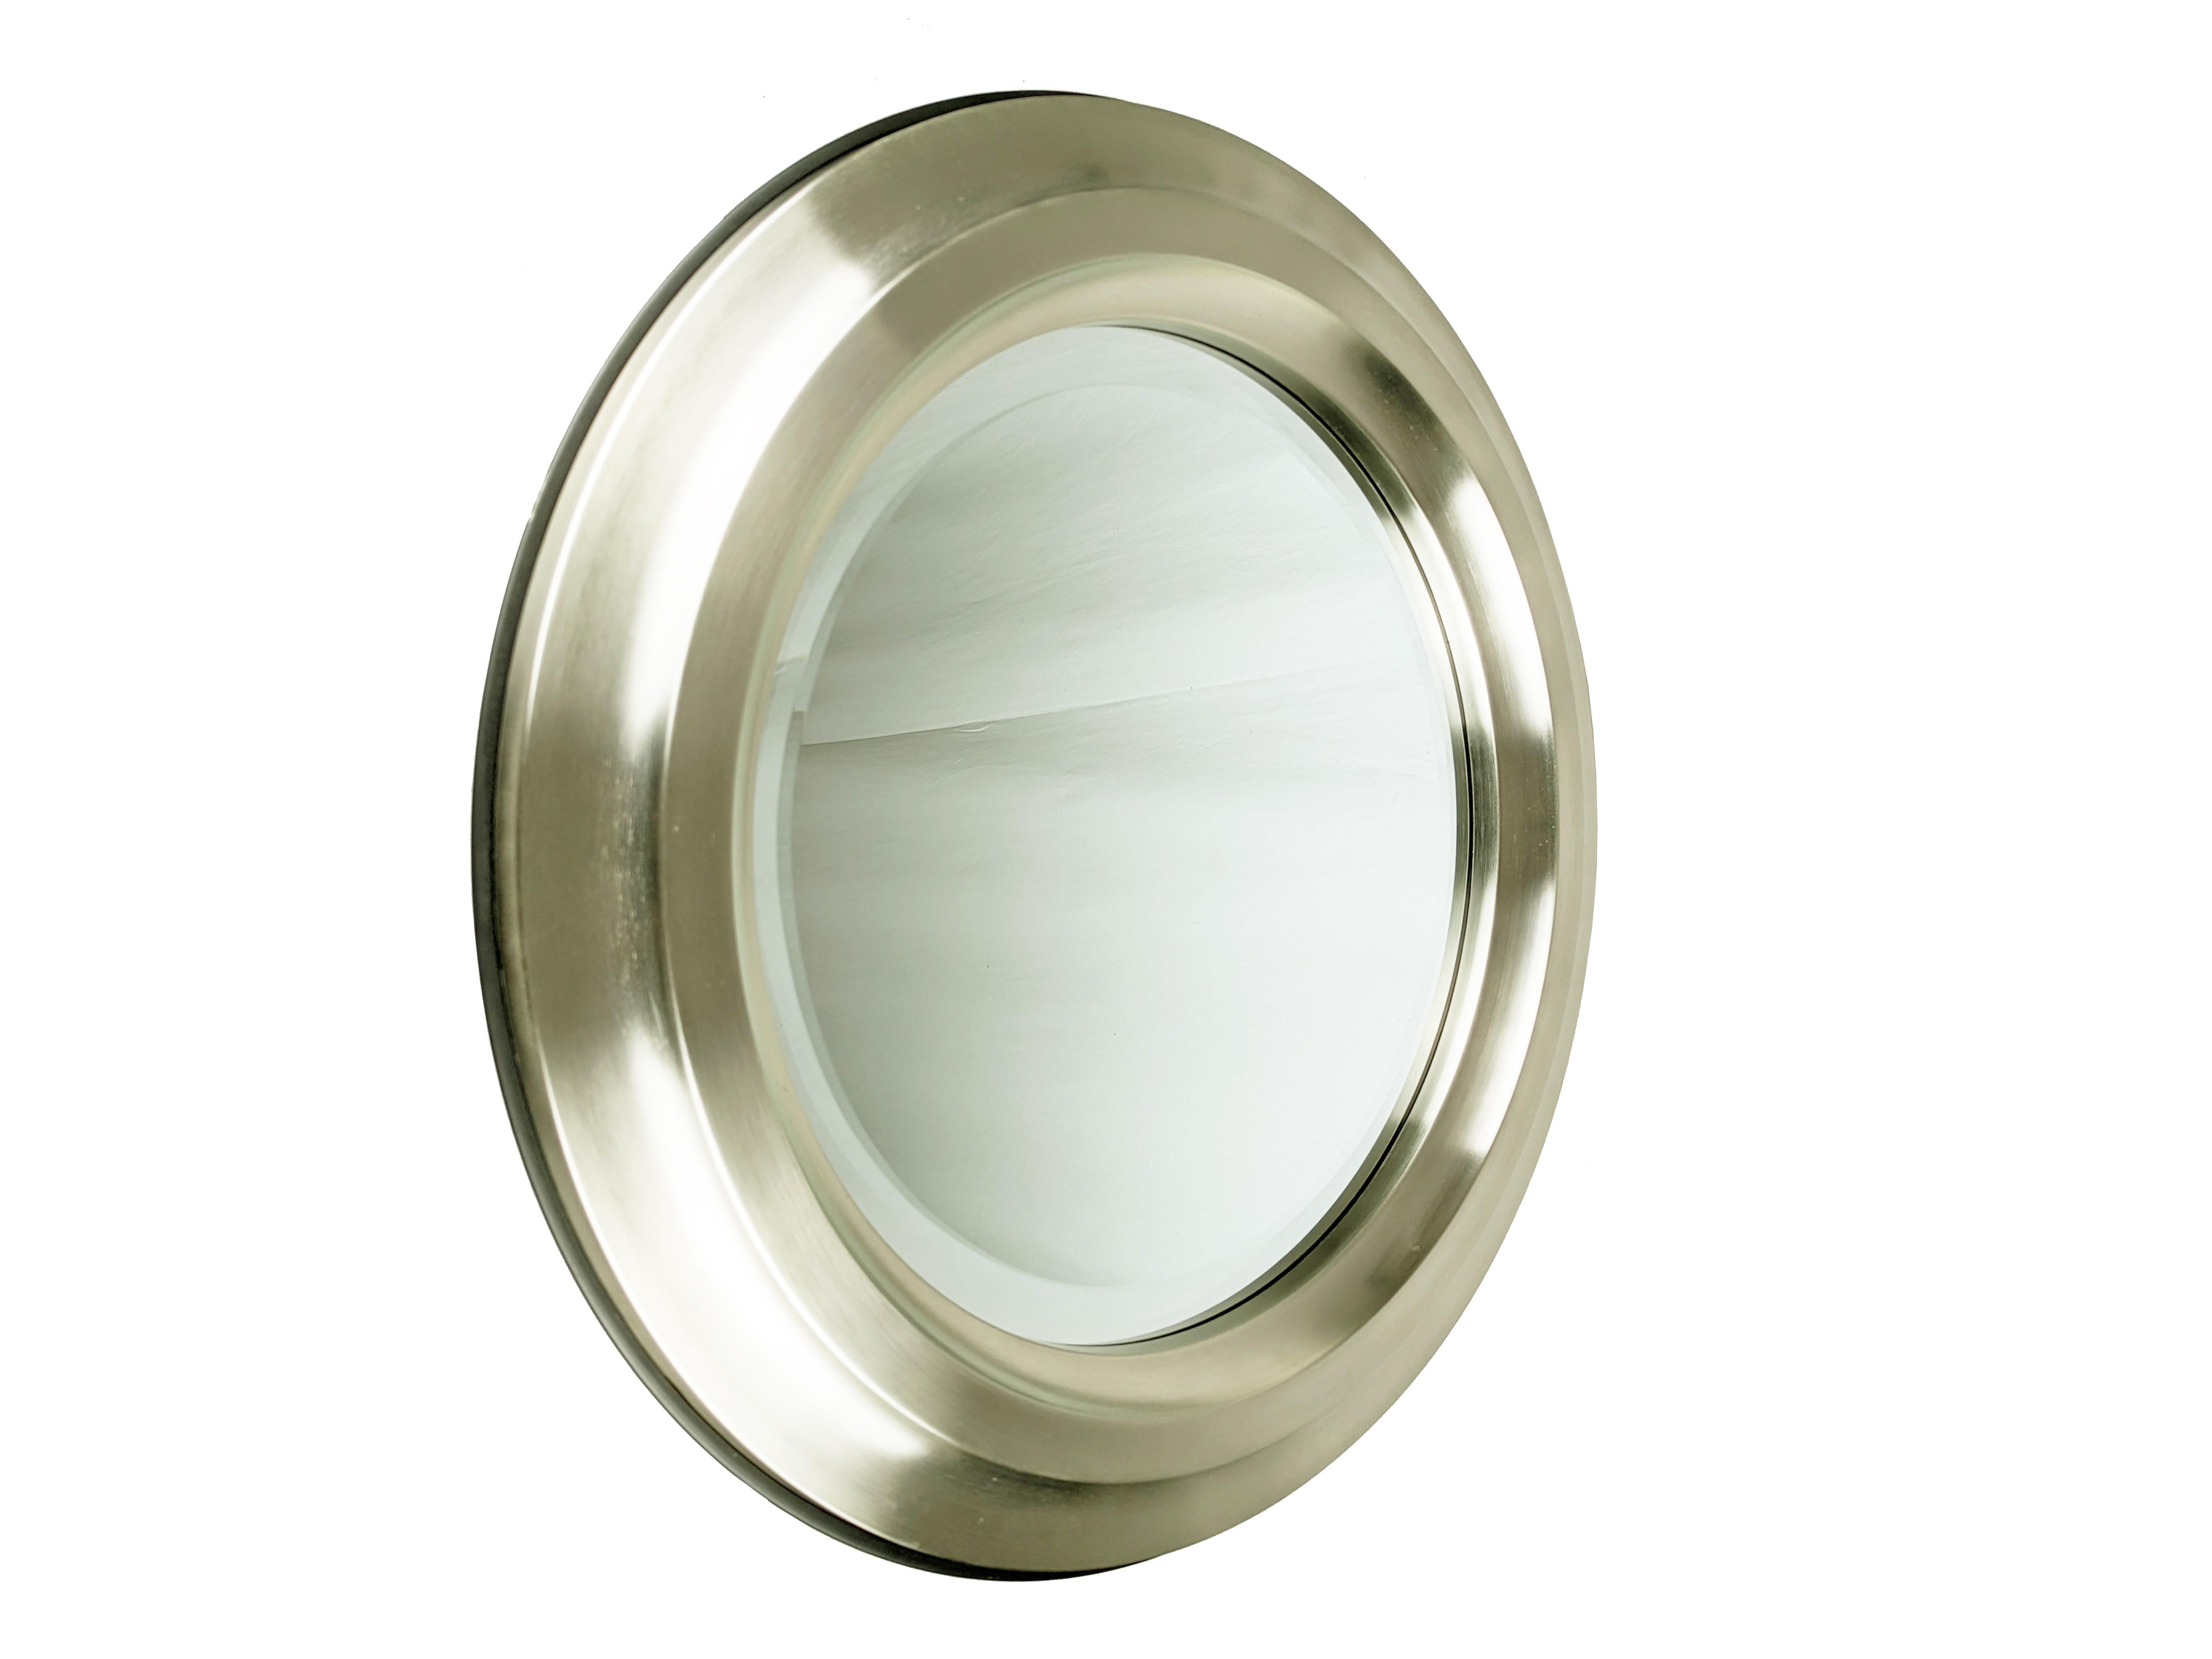 Brass & Nickel Plated Metal 1960s round mirrors, set of 2 For Sale 7